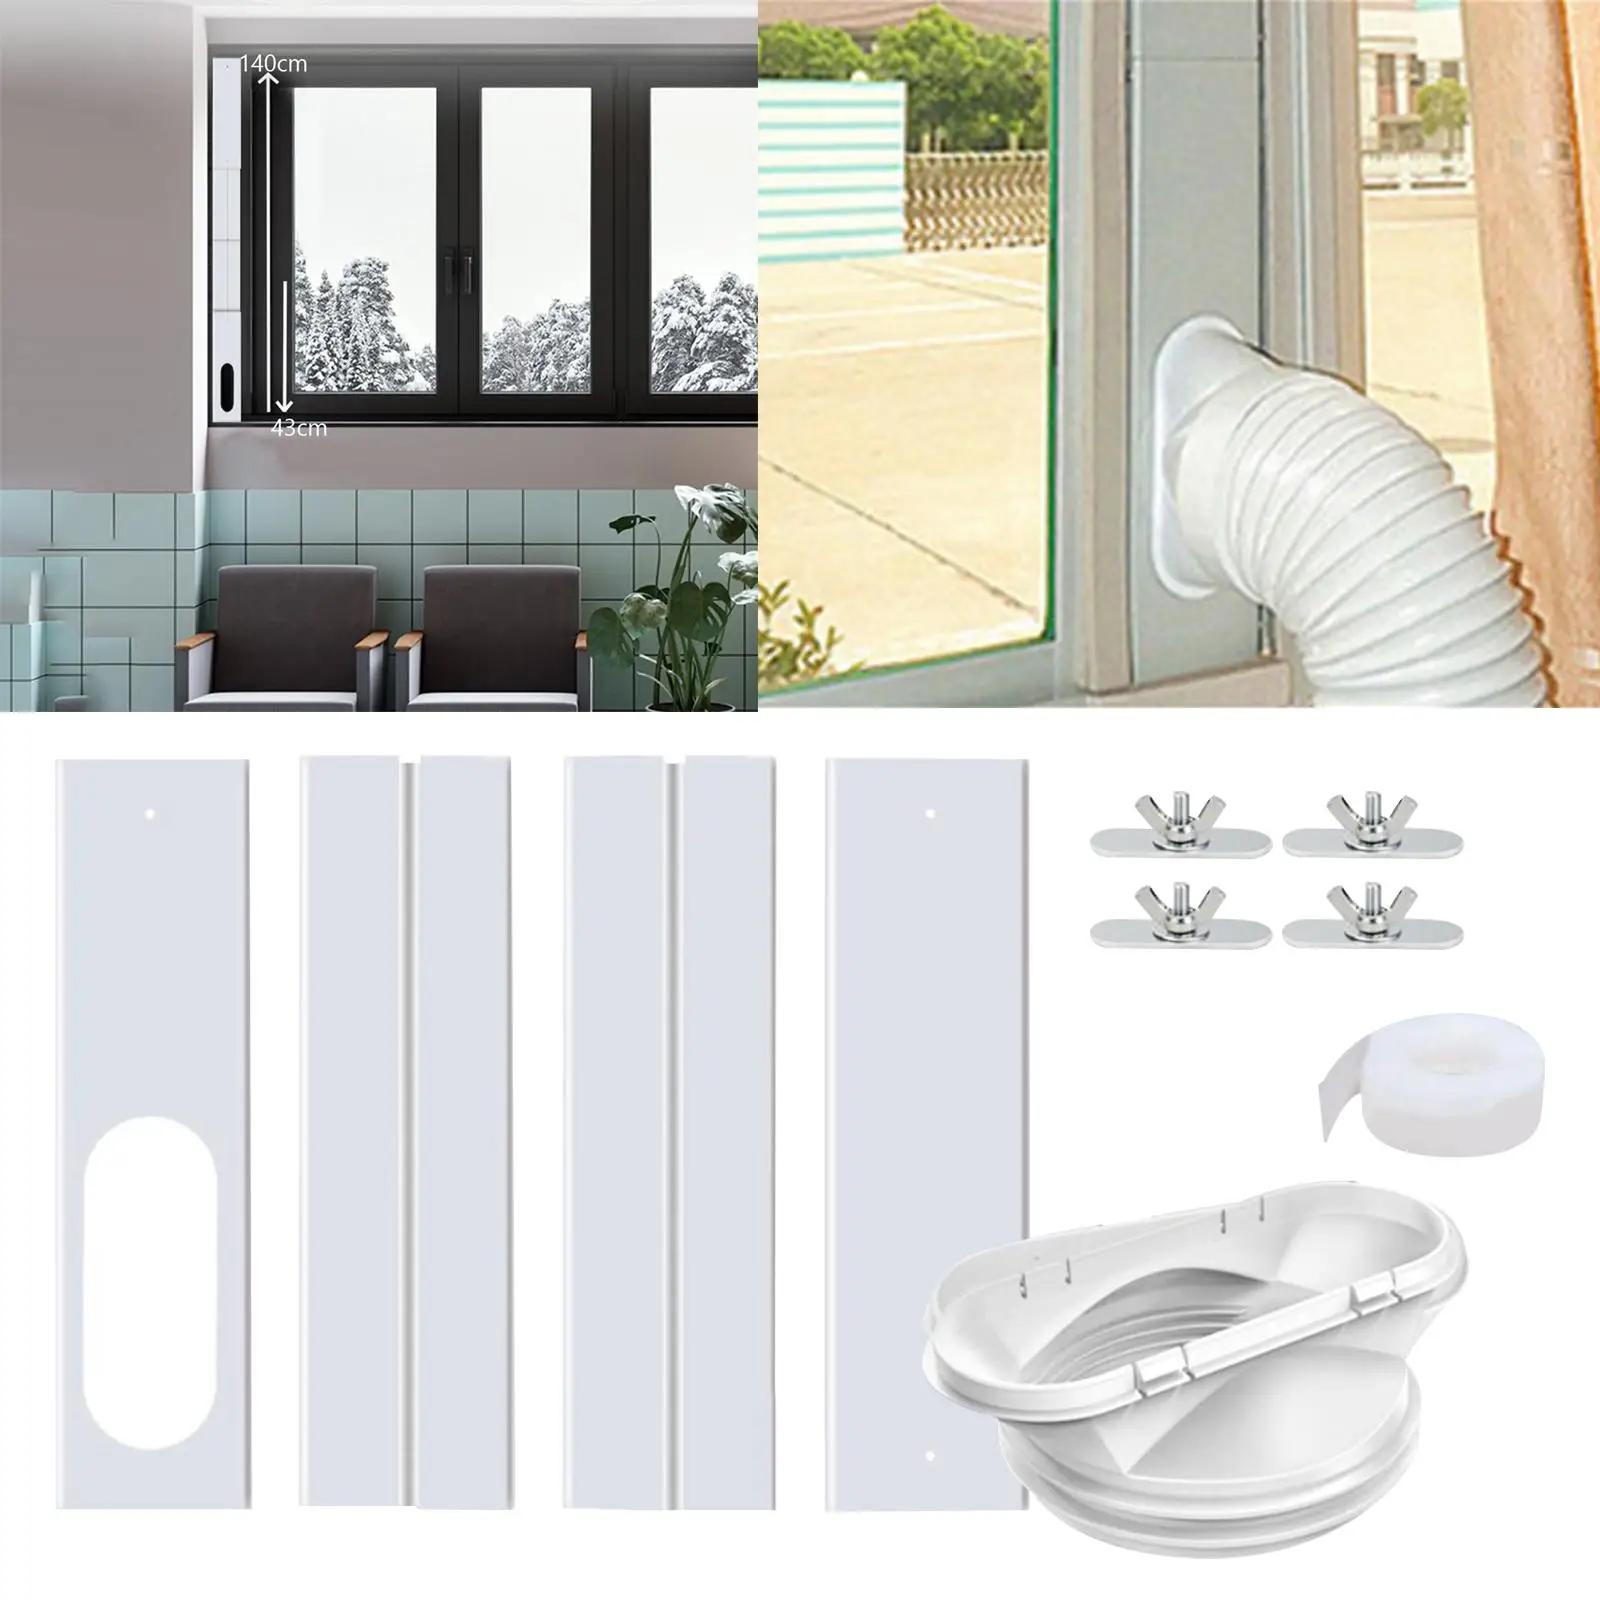 Portable Air Conditioner Window Kit Good Toughness PVC for Sliding Window